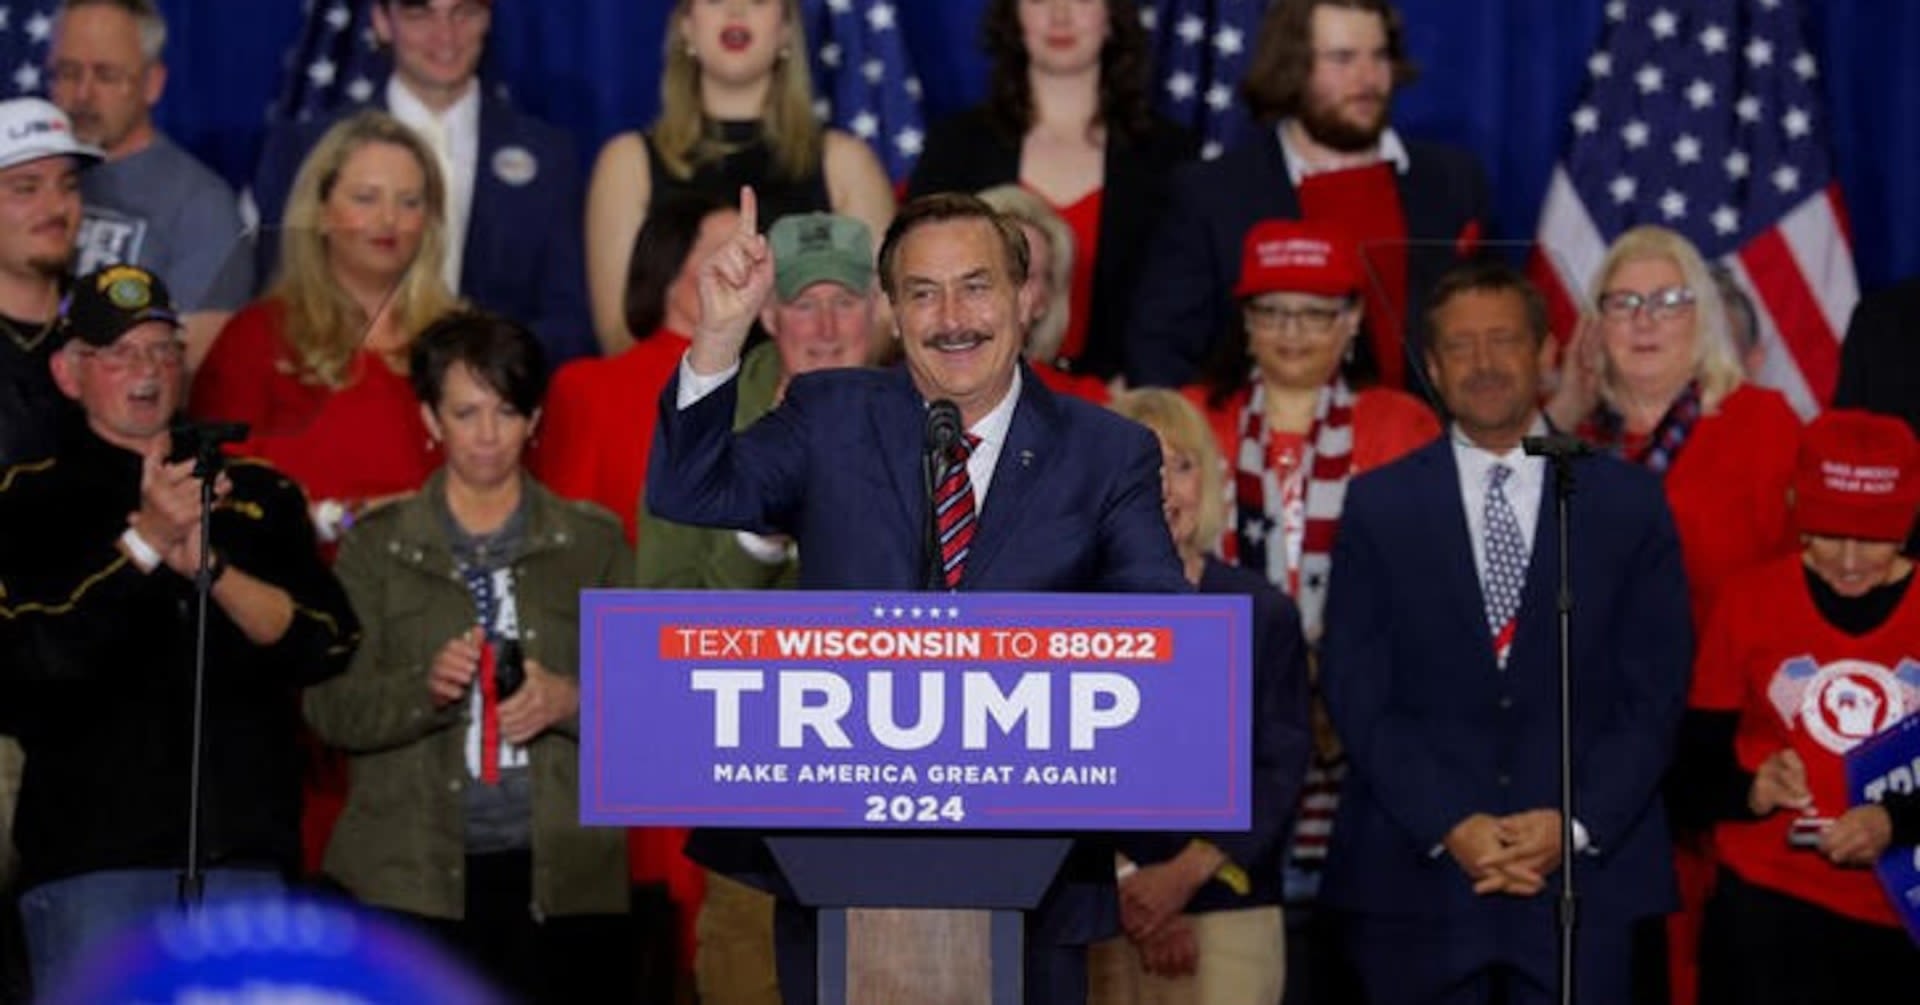 Trump ally Lindell appeals $5 mln prize to man who disproved voter fraud claims